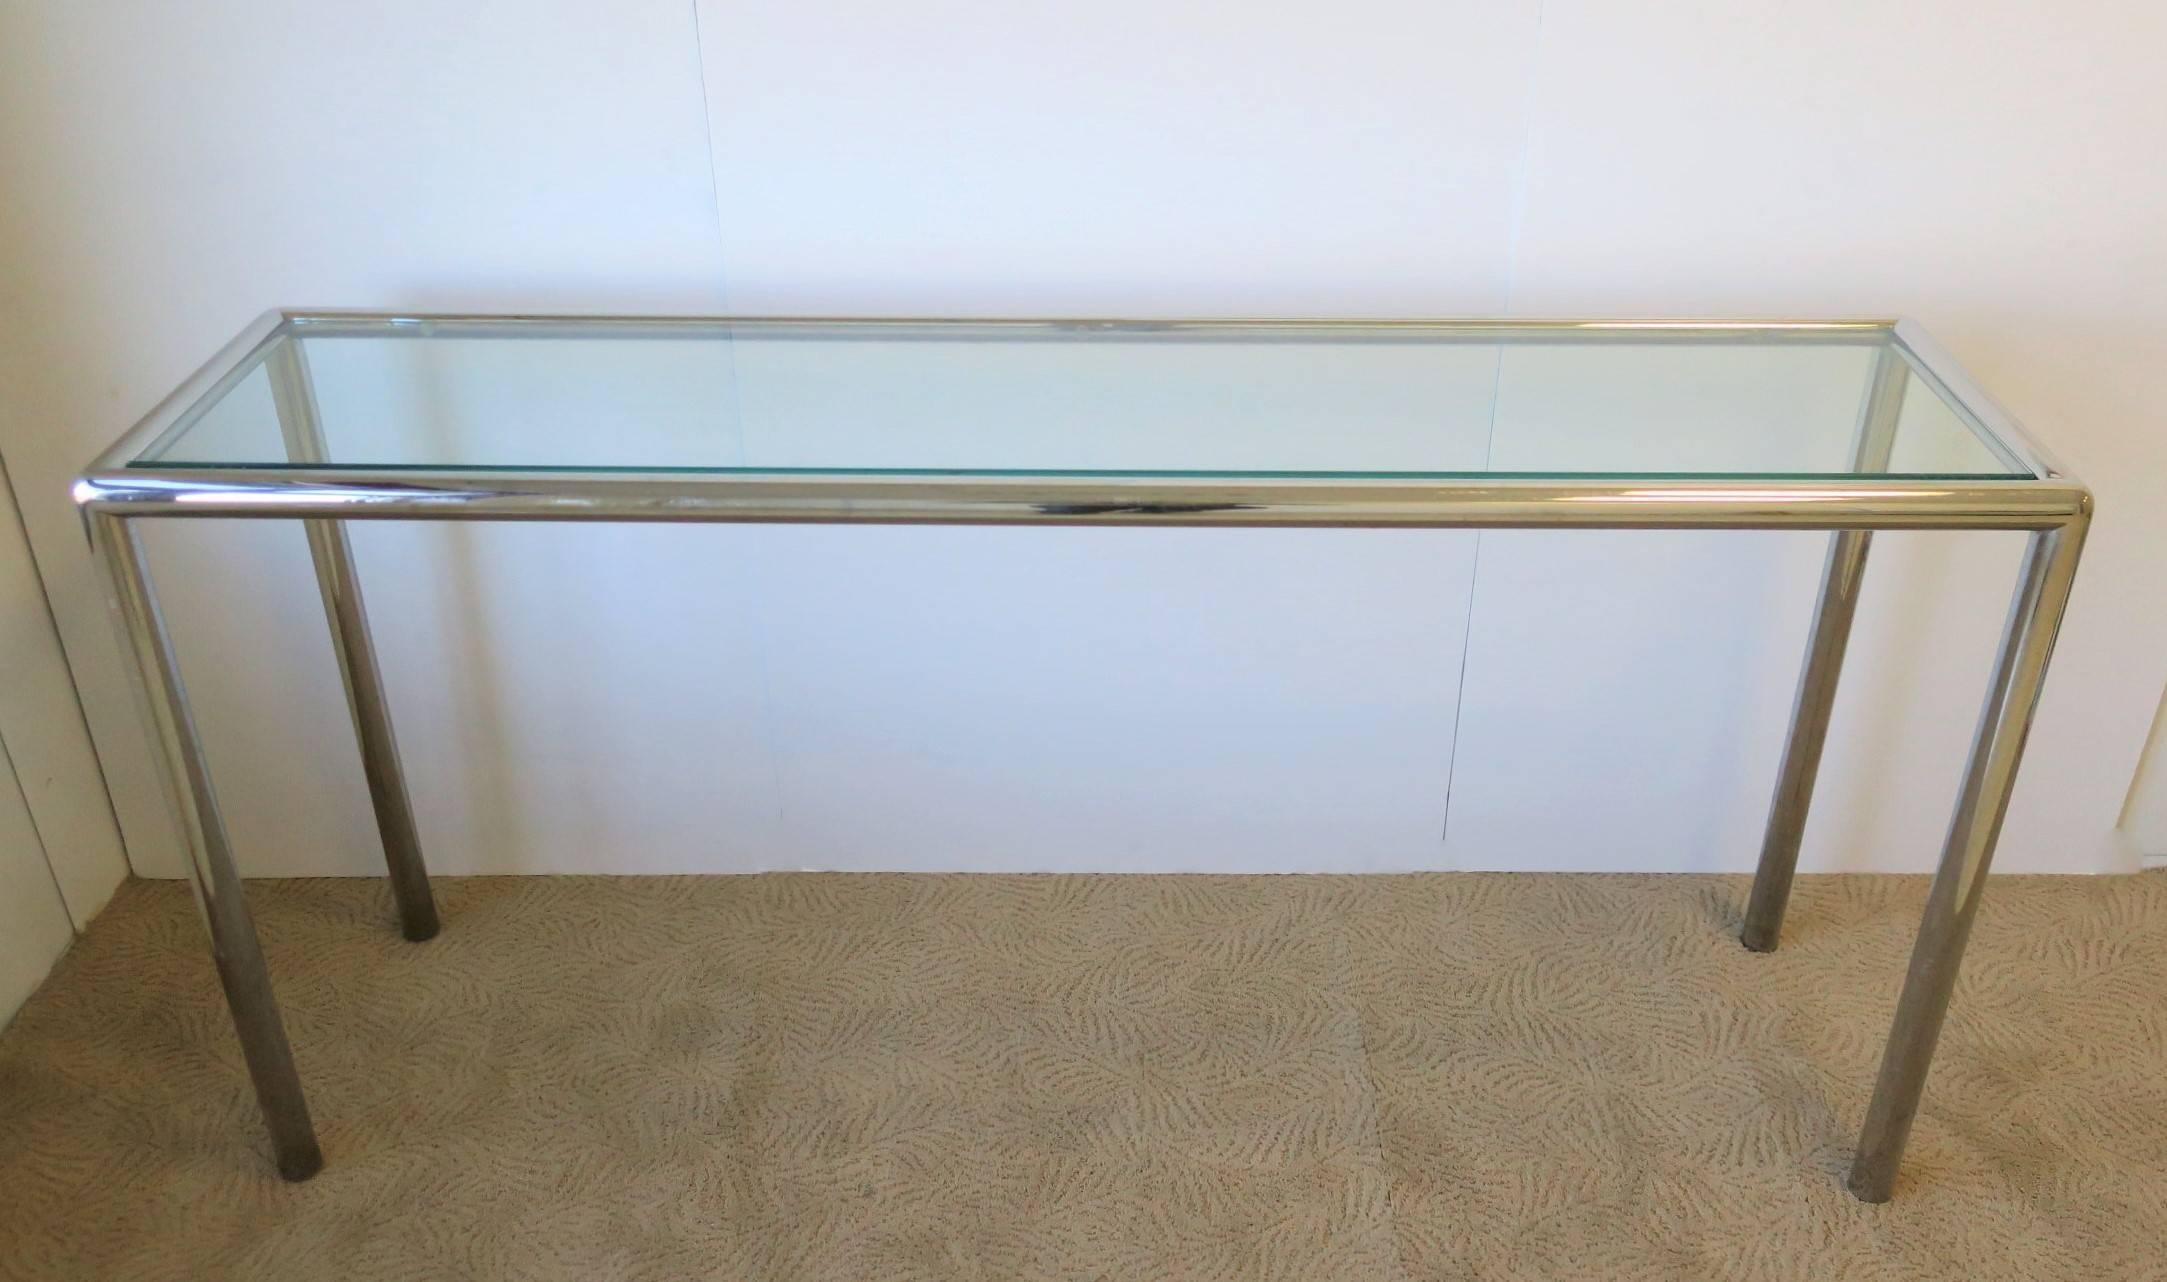 A substantial Modern style chrome and glass console table, circa late 20th Century. Chrome frame is tubular in shape with a substantial inset tempered glass top.

Measurements: 15